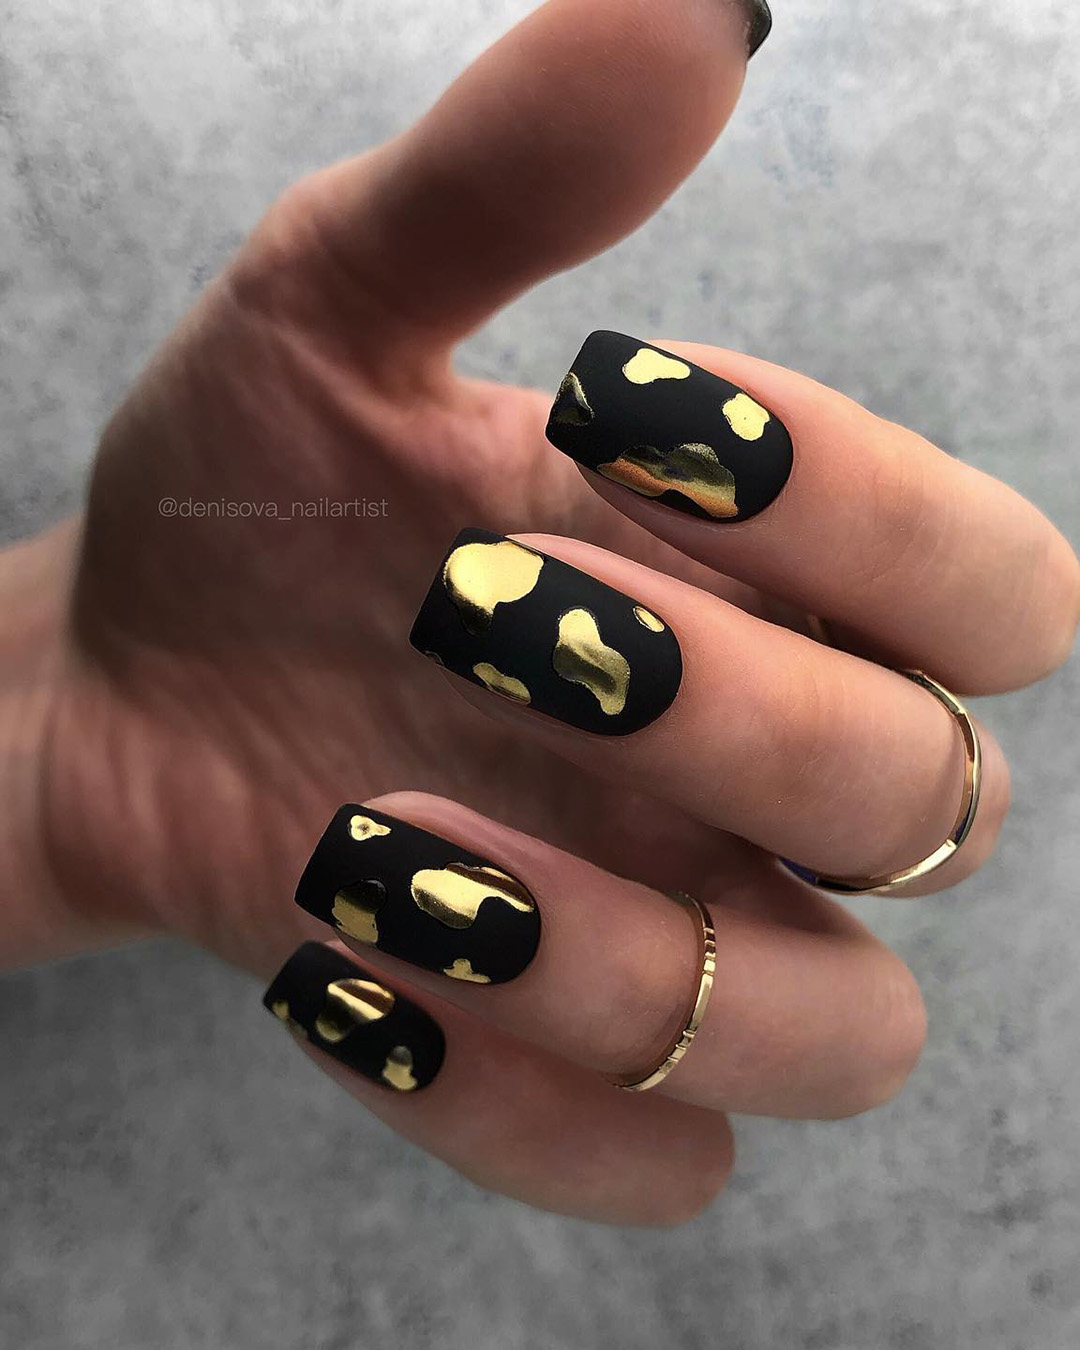 black and gold wedding nails matte and chrome denisova_nailartist - Black and Gold Wedding Nail Designs